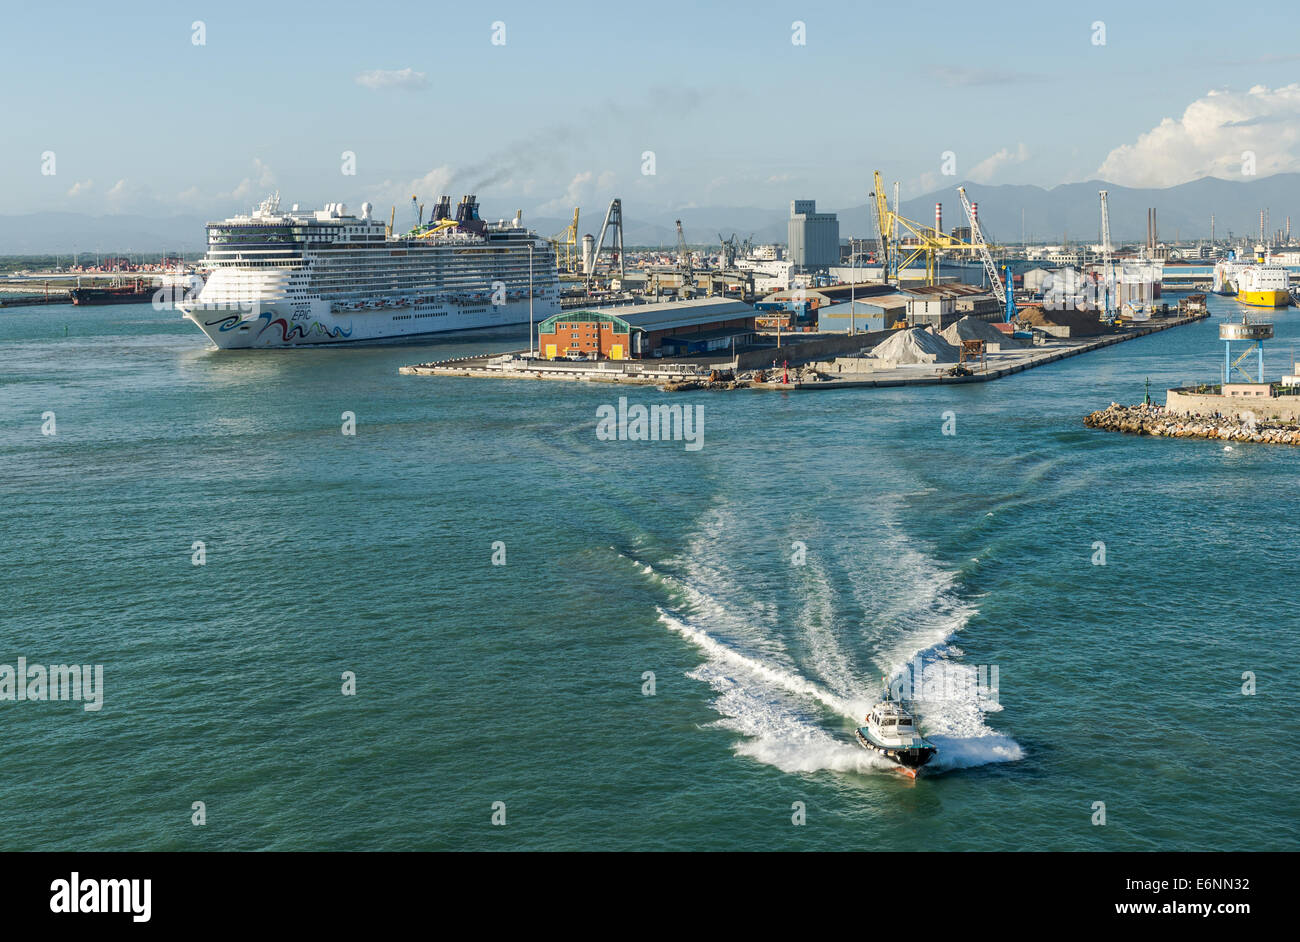 The Norwegian epic cruise ship preparing to leave Livorno harbour in Italy. Stock Photo